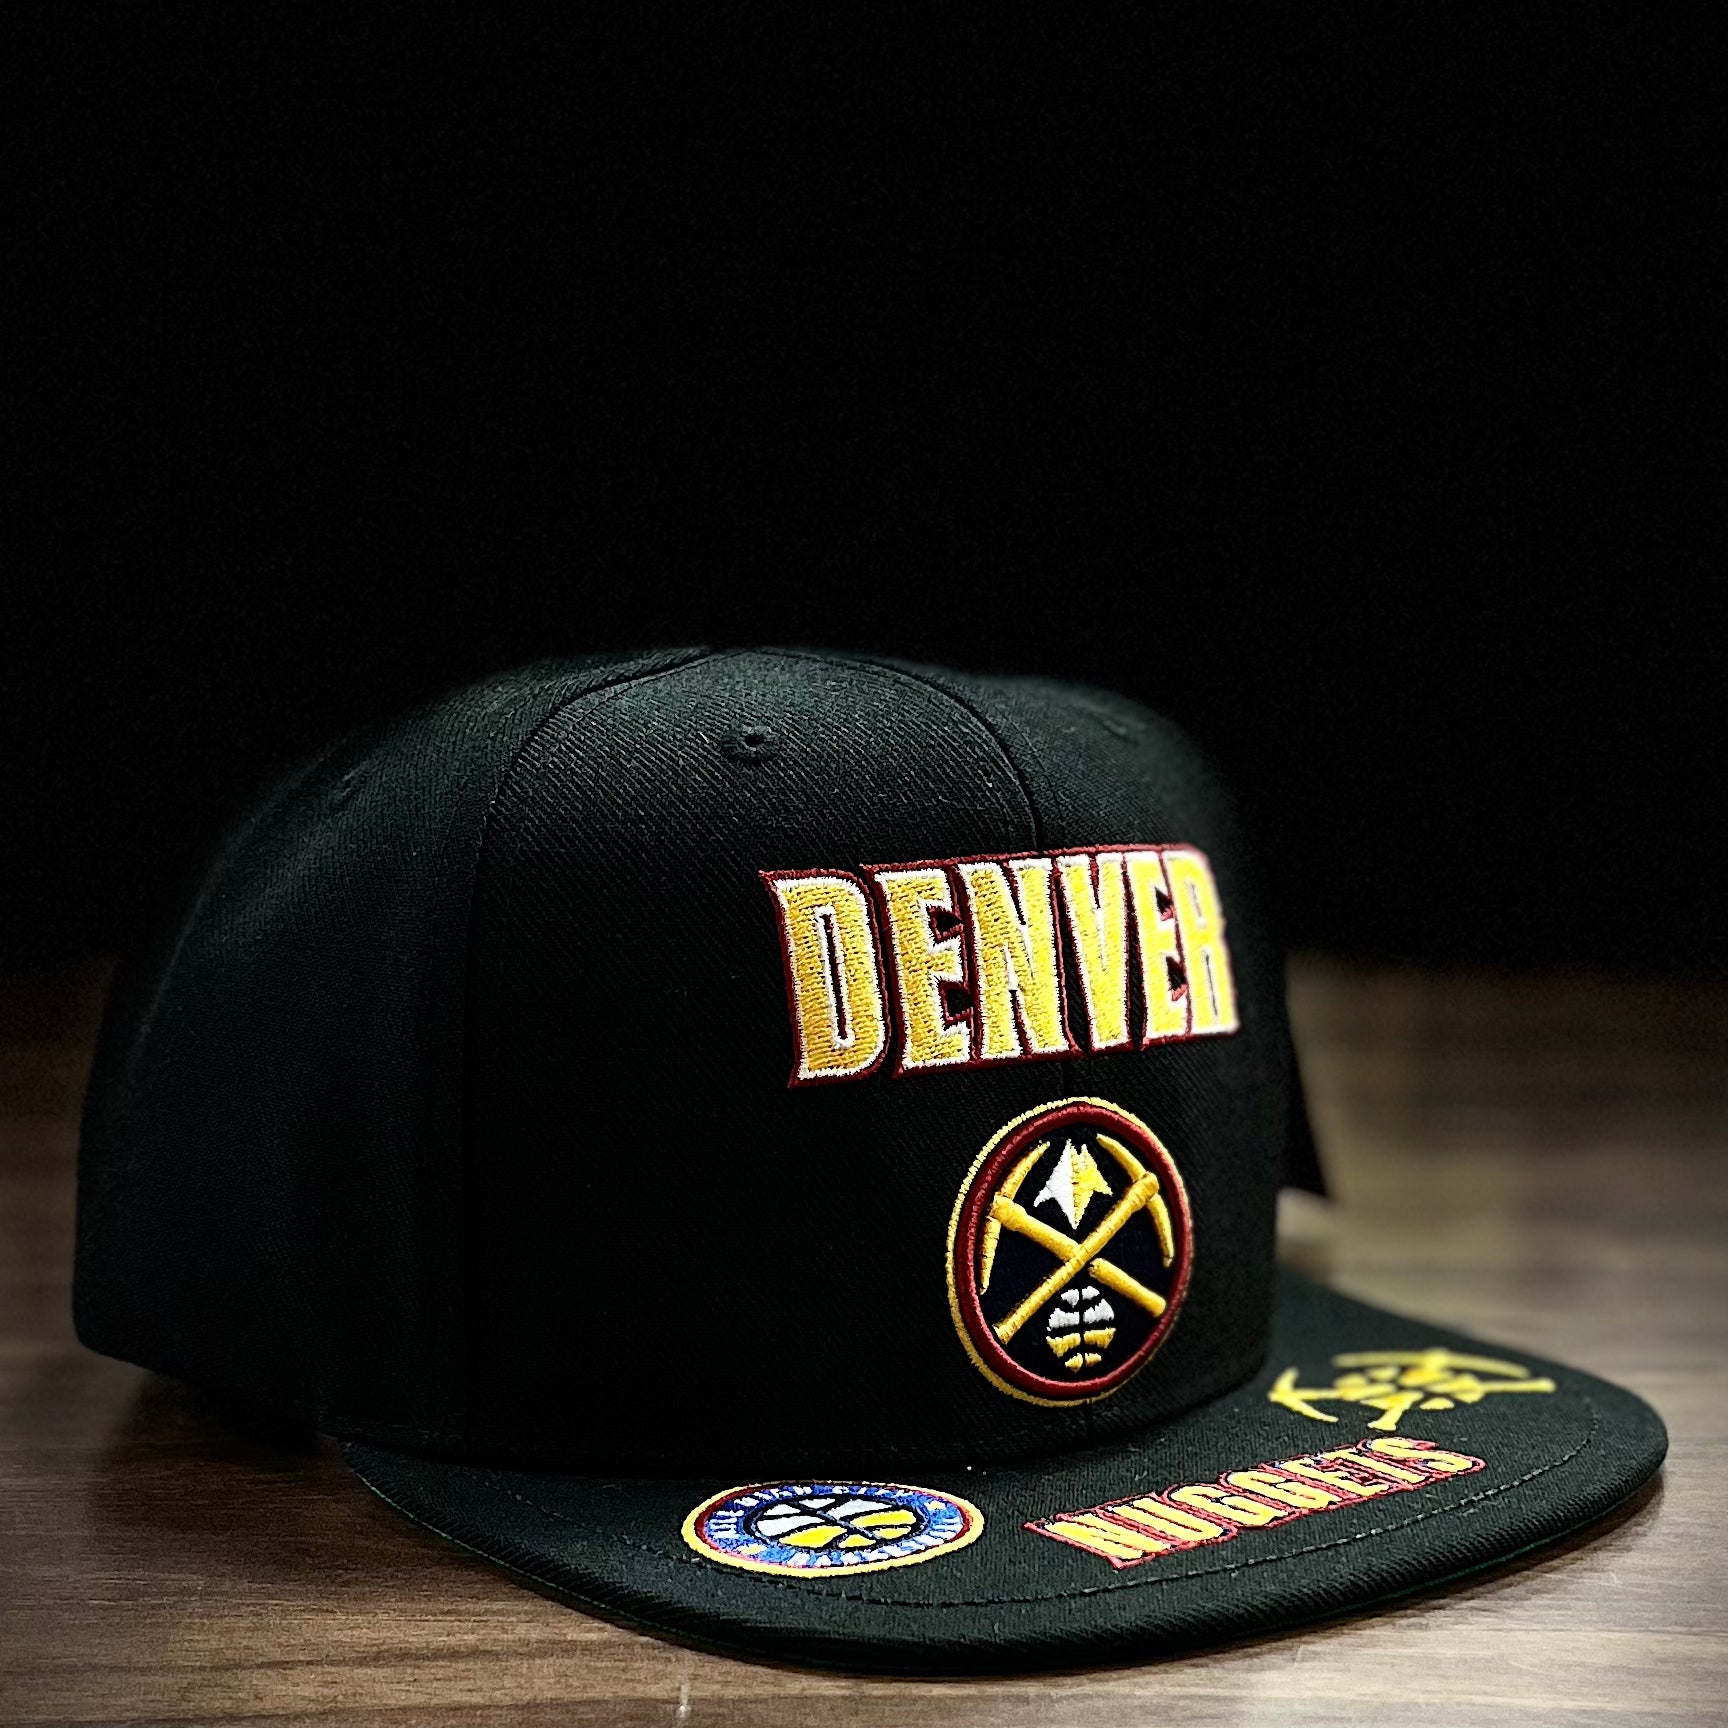 Customized Mitchell & Ness Denver Nuggets Snapback